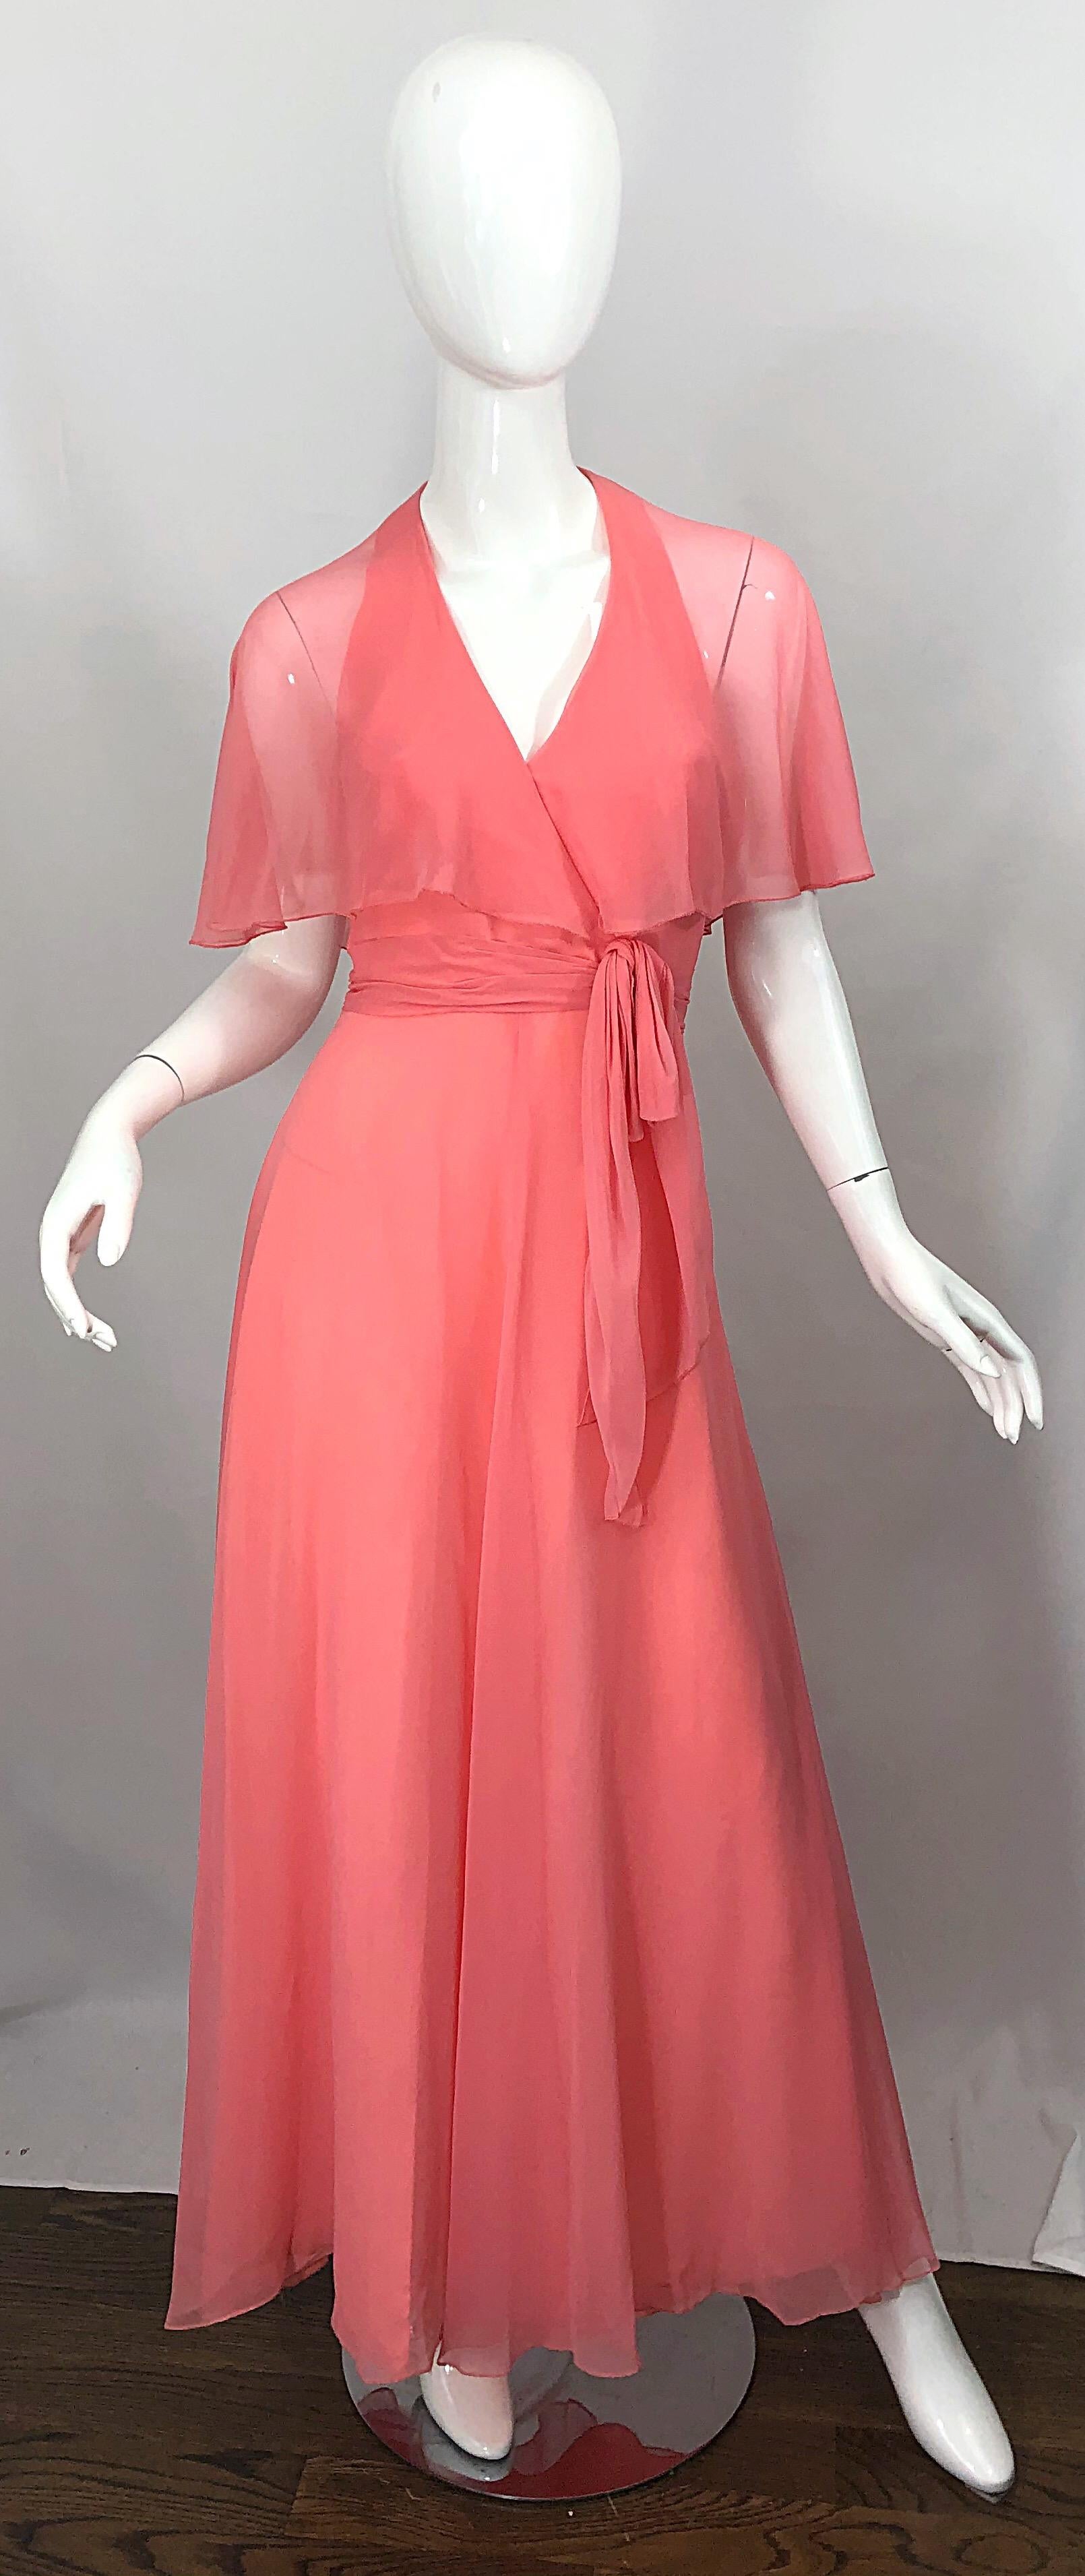 Beautiful 1970s coral pink halter maxi dress / gown with attached sheer caplet! Features a halter neck with two spaghetti straps in the back to offer additional support. Self tied sash belt at left waist. Tailored bodice with a full skirt. Hidden